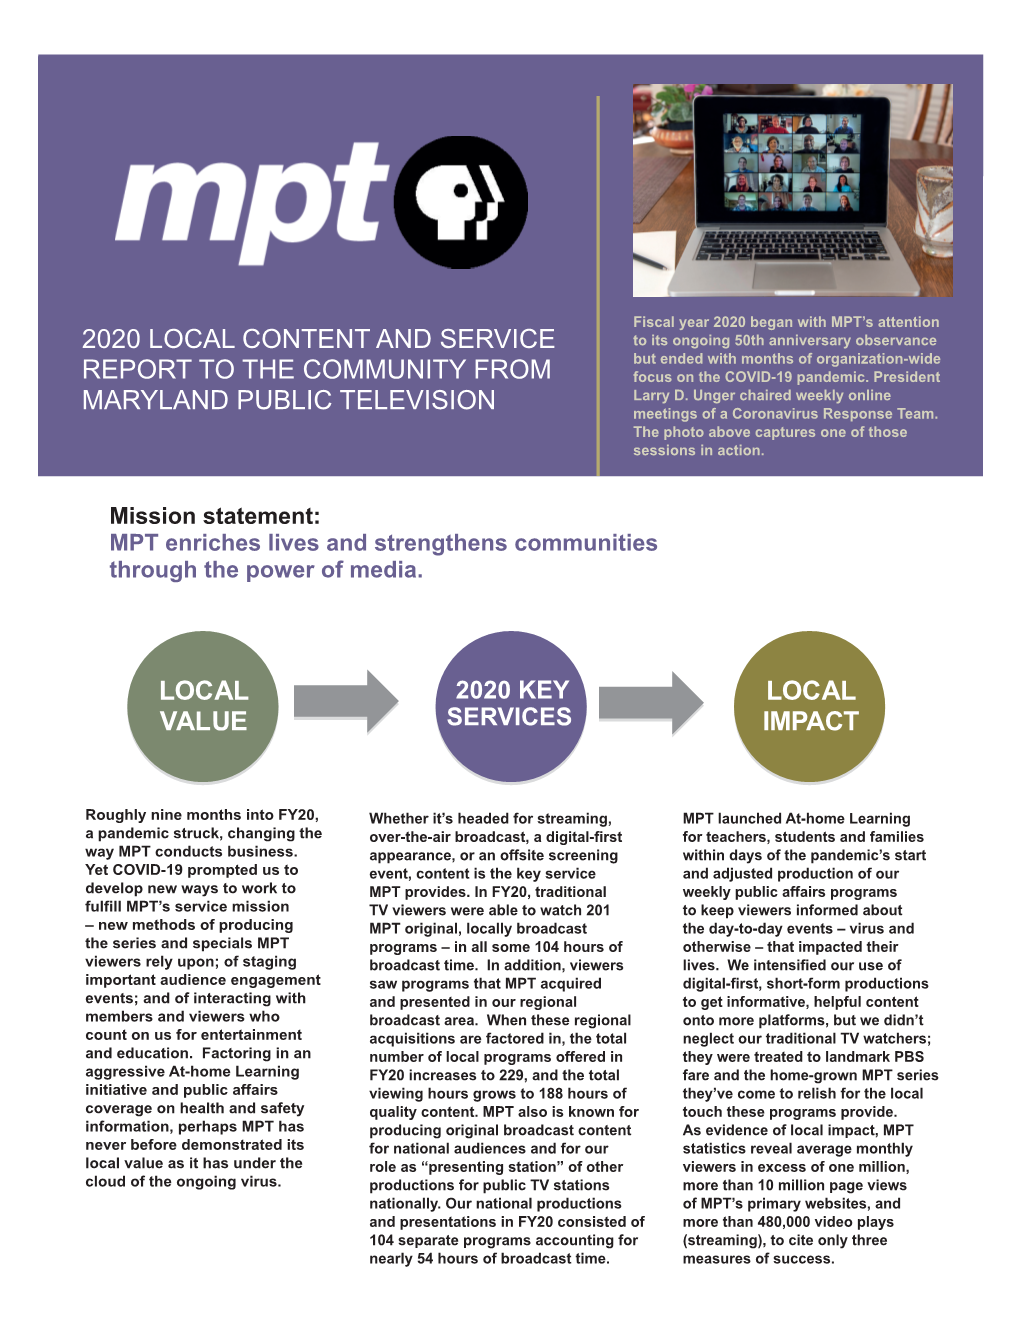 2020 Local Content and Service Report to the Community